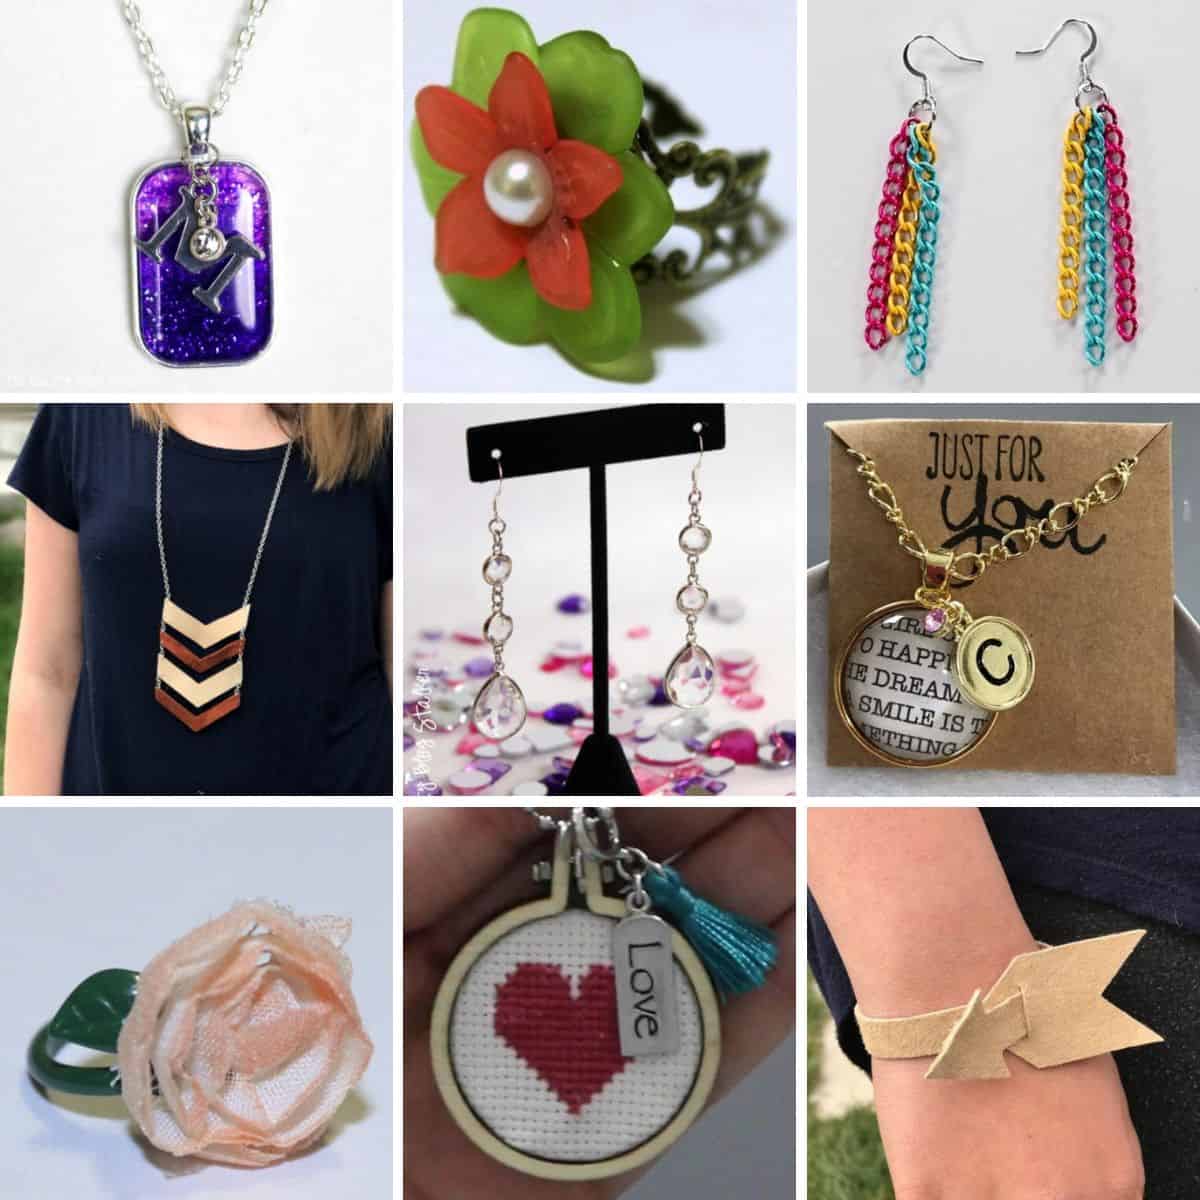 28 Beautiful and Unique Handmade Jewelry Ideas - The Crafty Blog